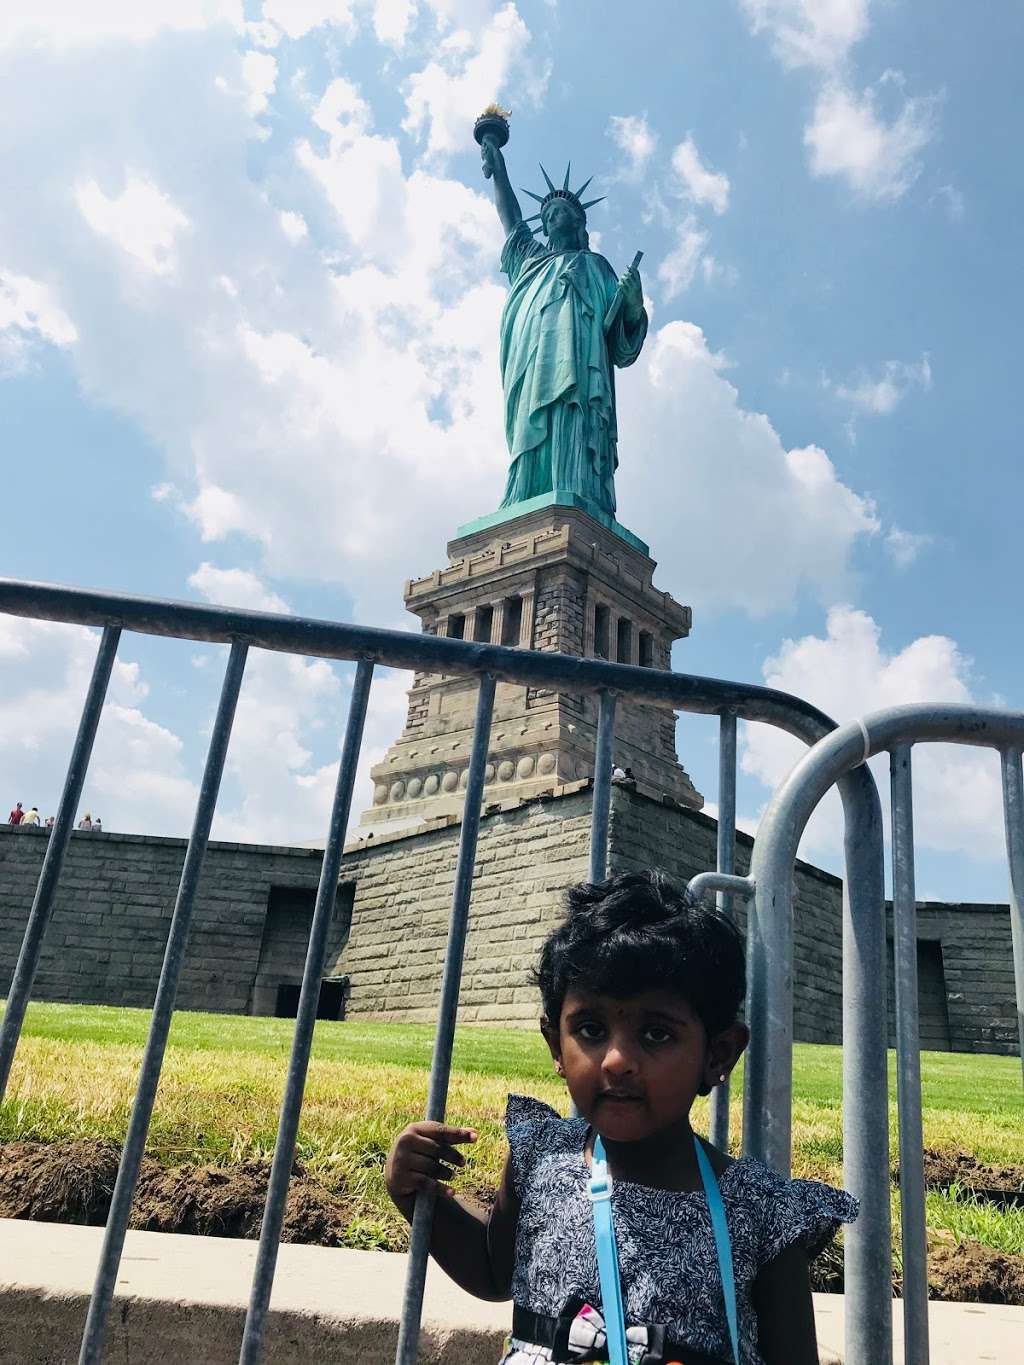 Statue of liberty parking | Photo 3 of 10 | Address: Unnamed Road, Jersey City, NJ 07305, USA | Phone: (201) 915-3400